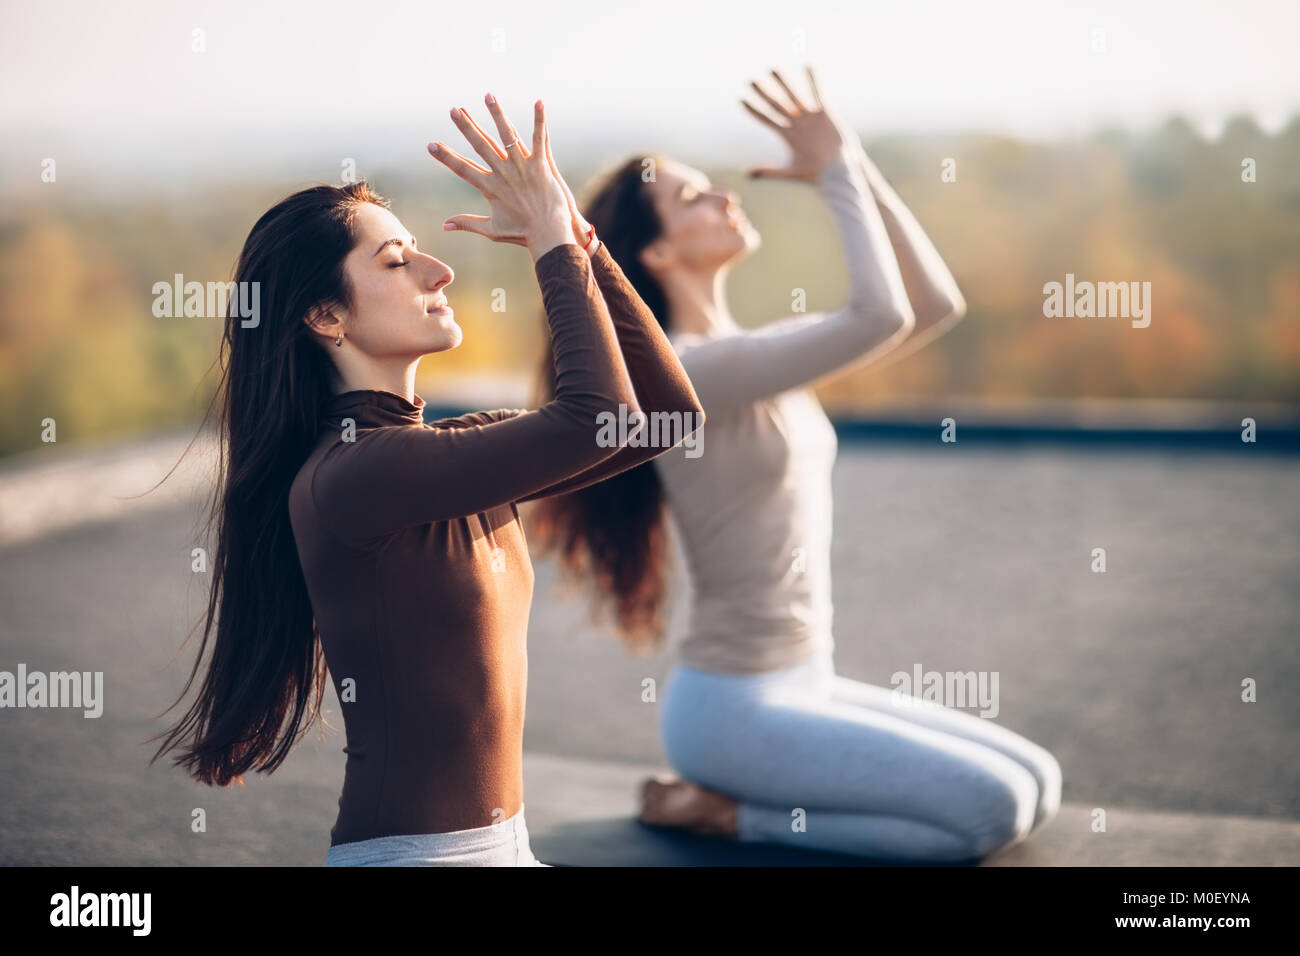 Two young beautiful women doing yoga asana, sitting in vajrasana exercise on the roof outdoor. Girlfriends perform a comfortable pose of eastern pract Stock Photo